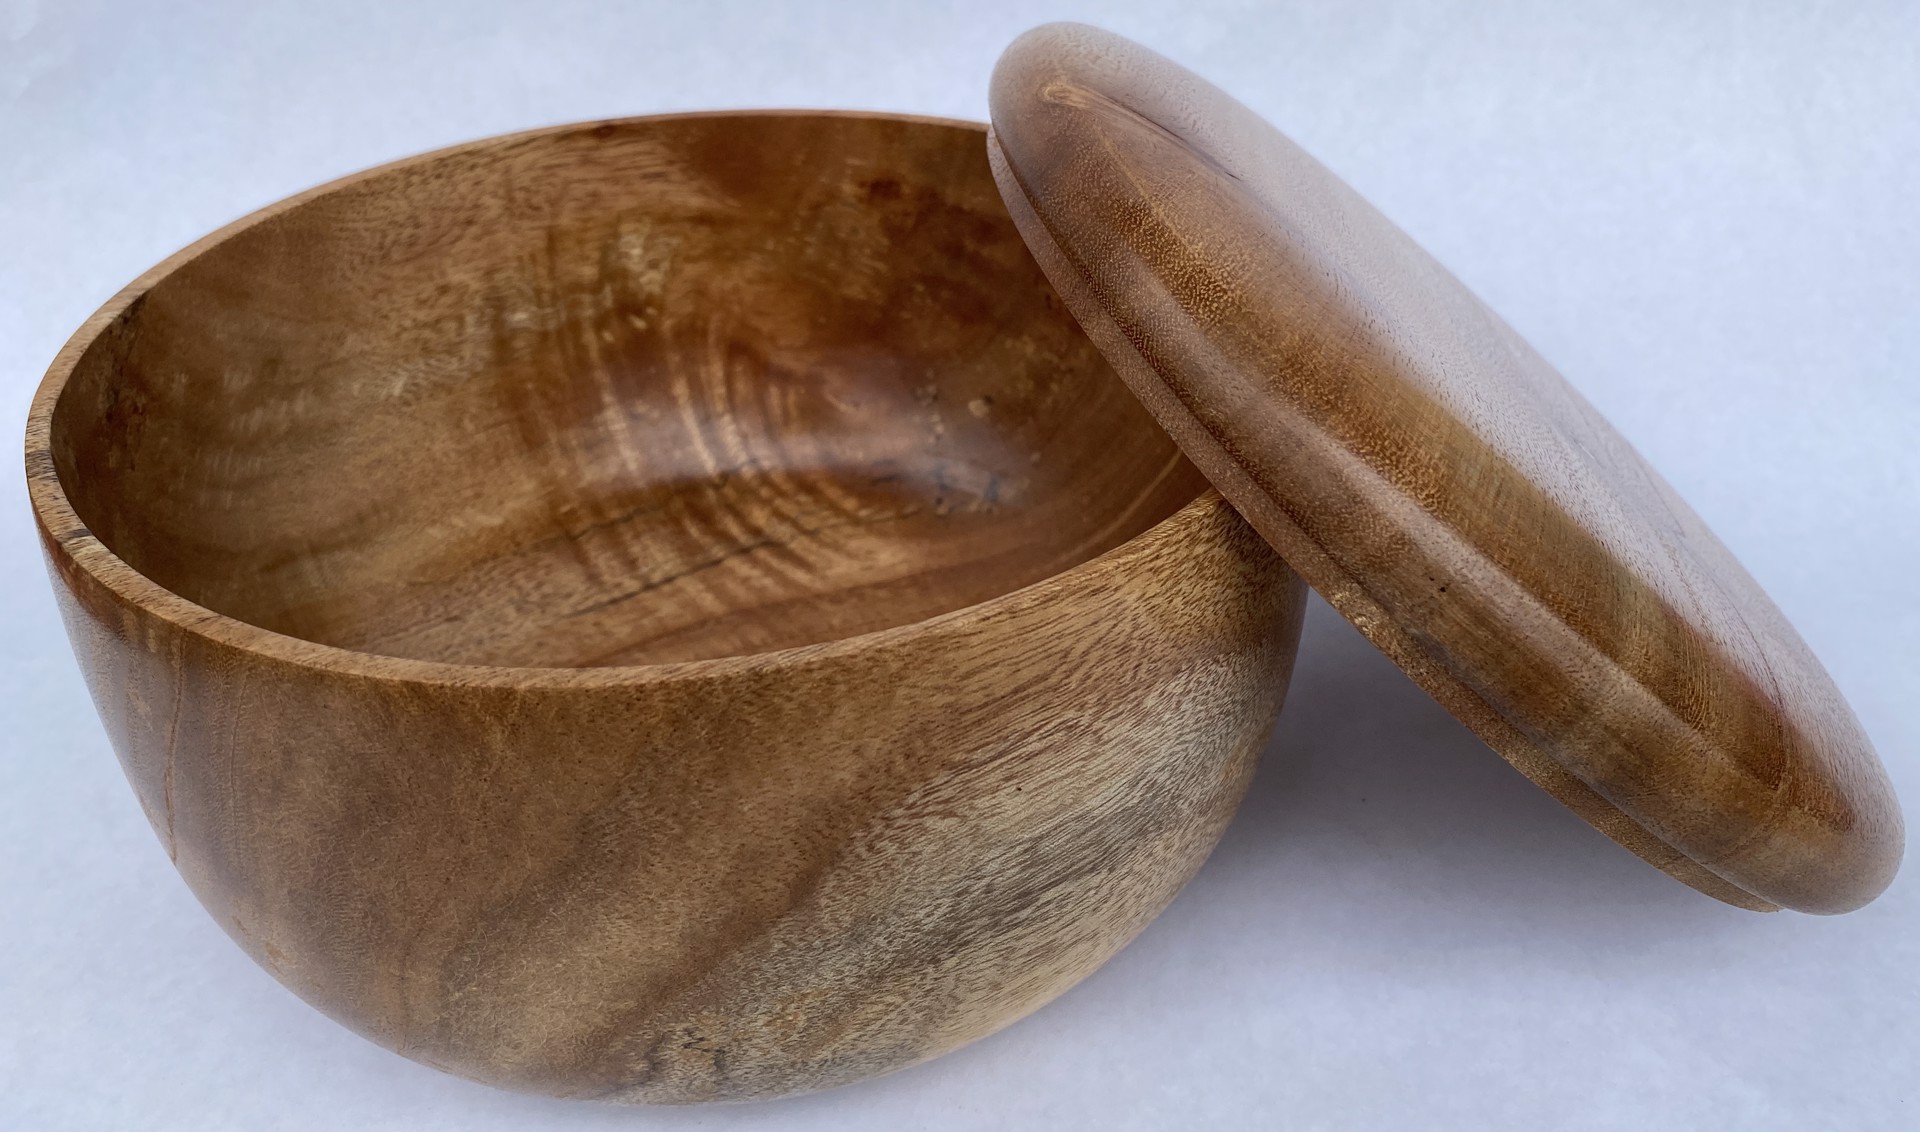 Koa Bowl with Lid #93 by Mark Walden